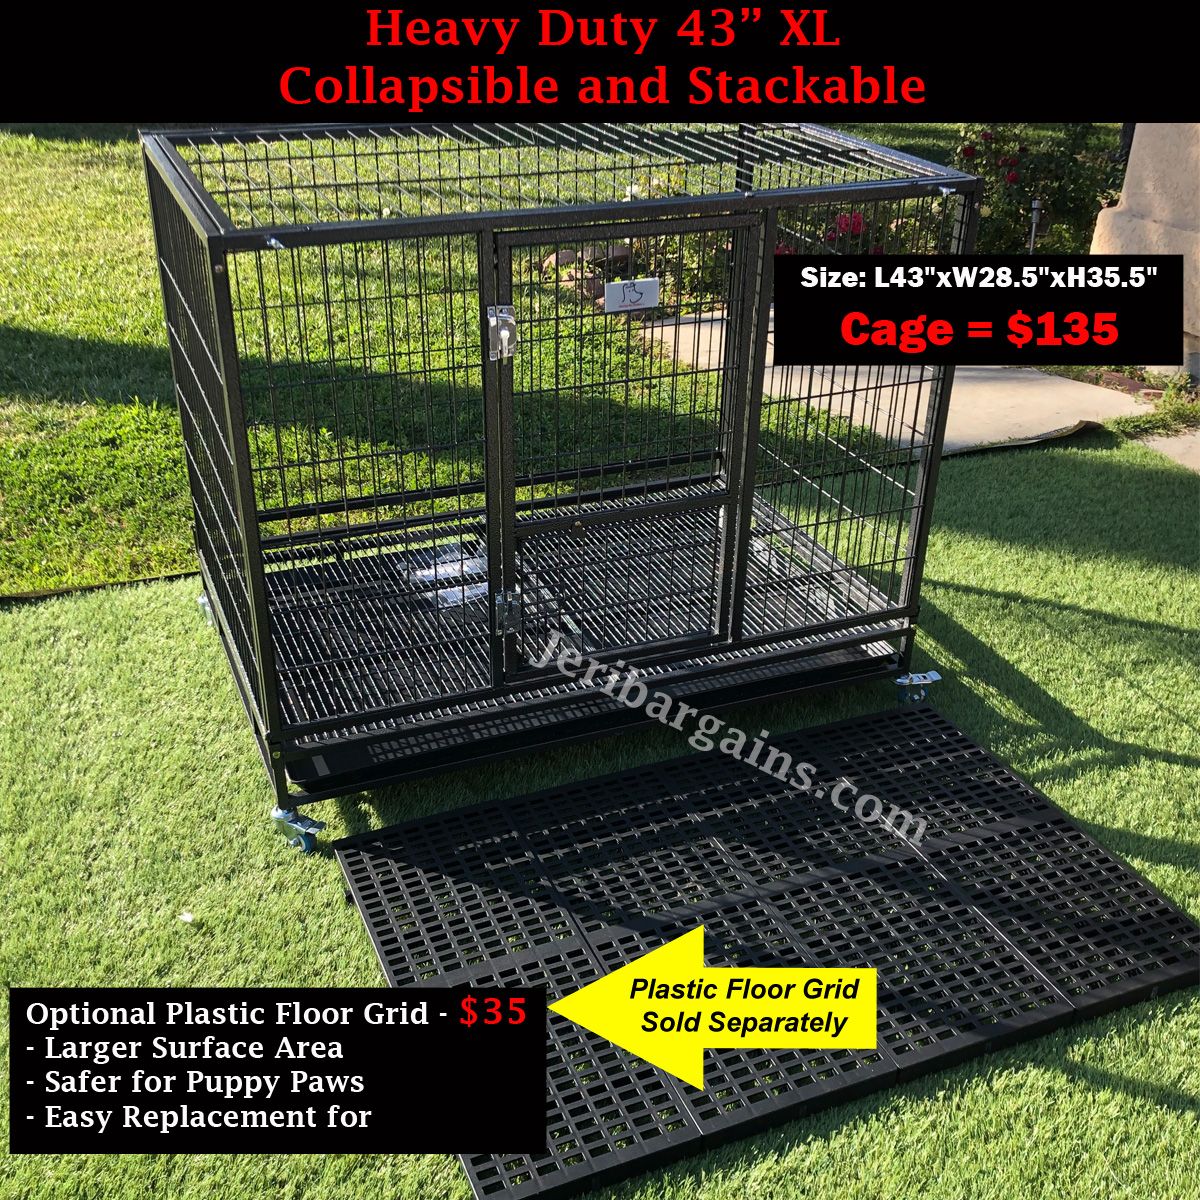 New Heavy Duty 43" XL Collapsible Stacking Dog Cage Kennel Crate Raised Floor